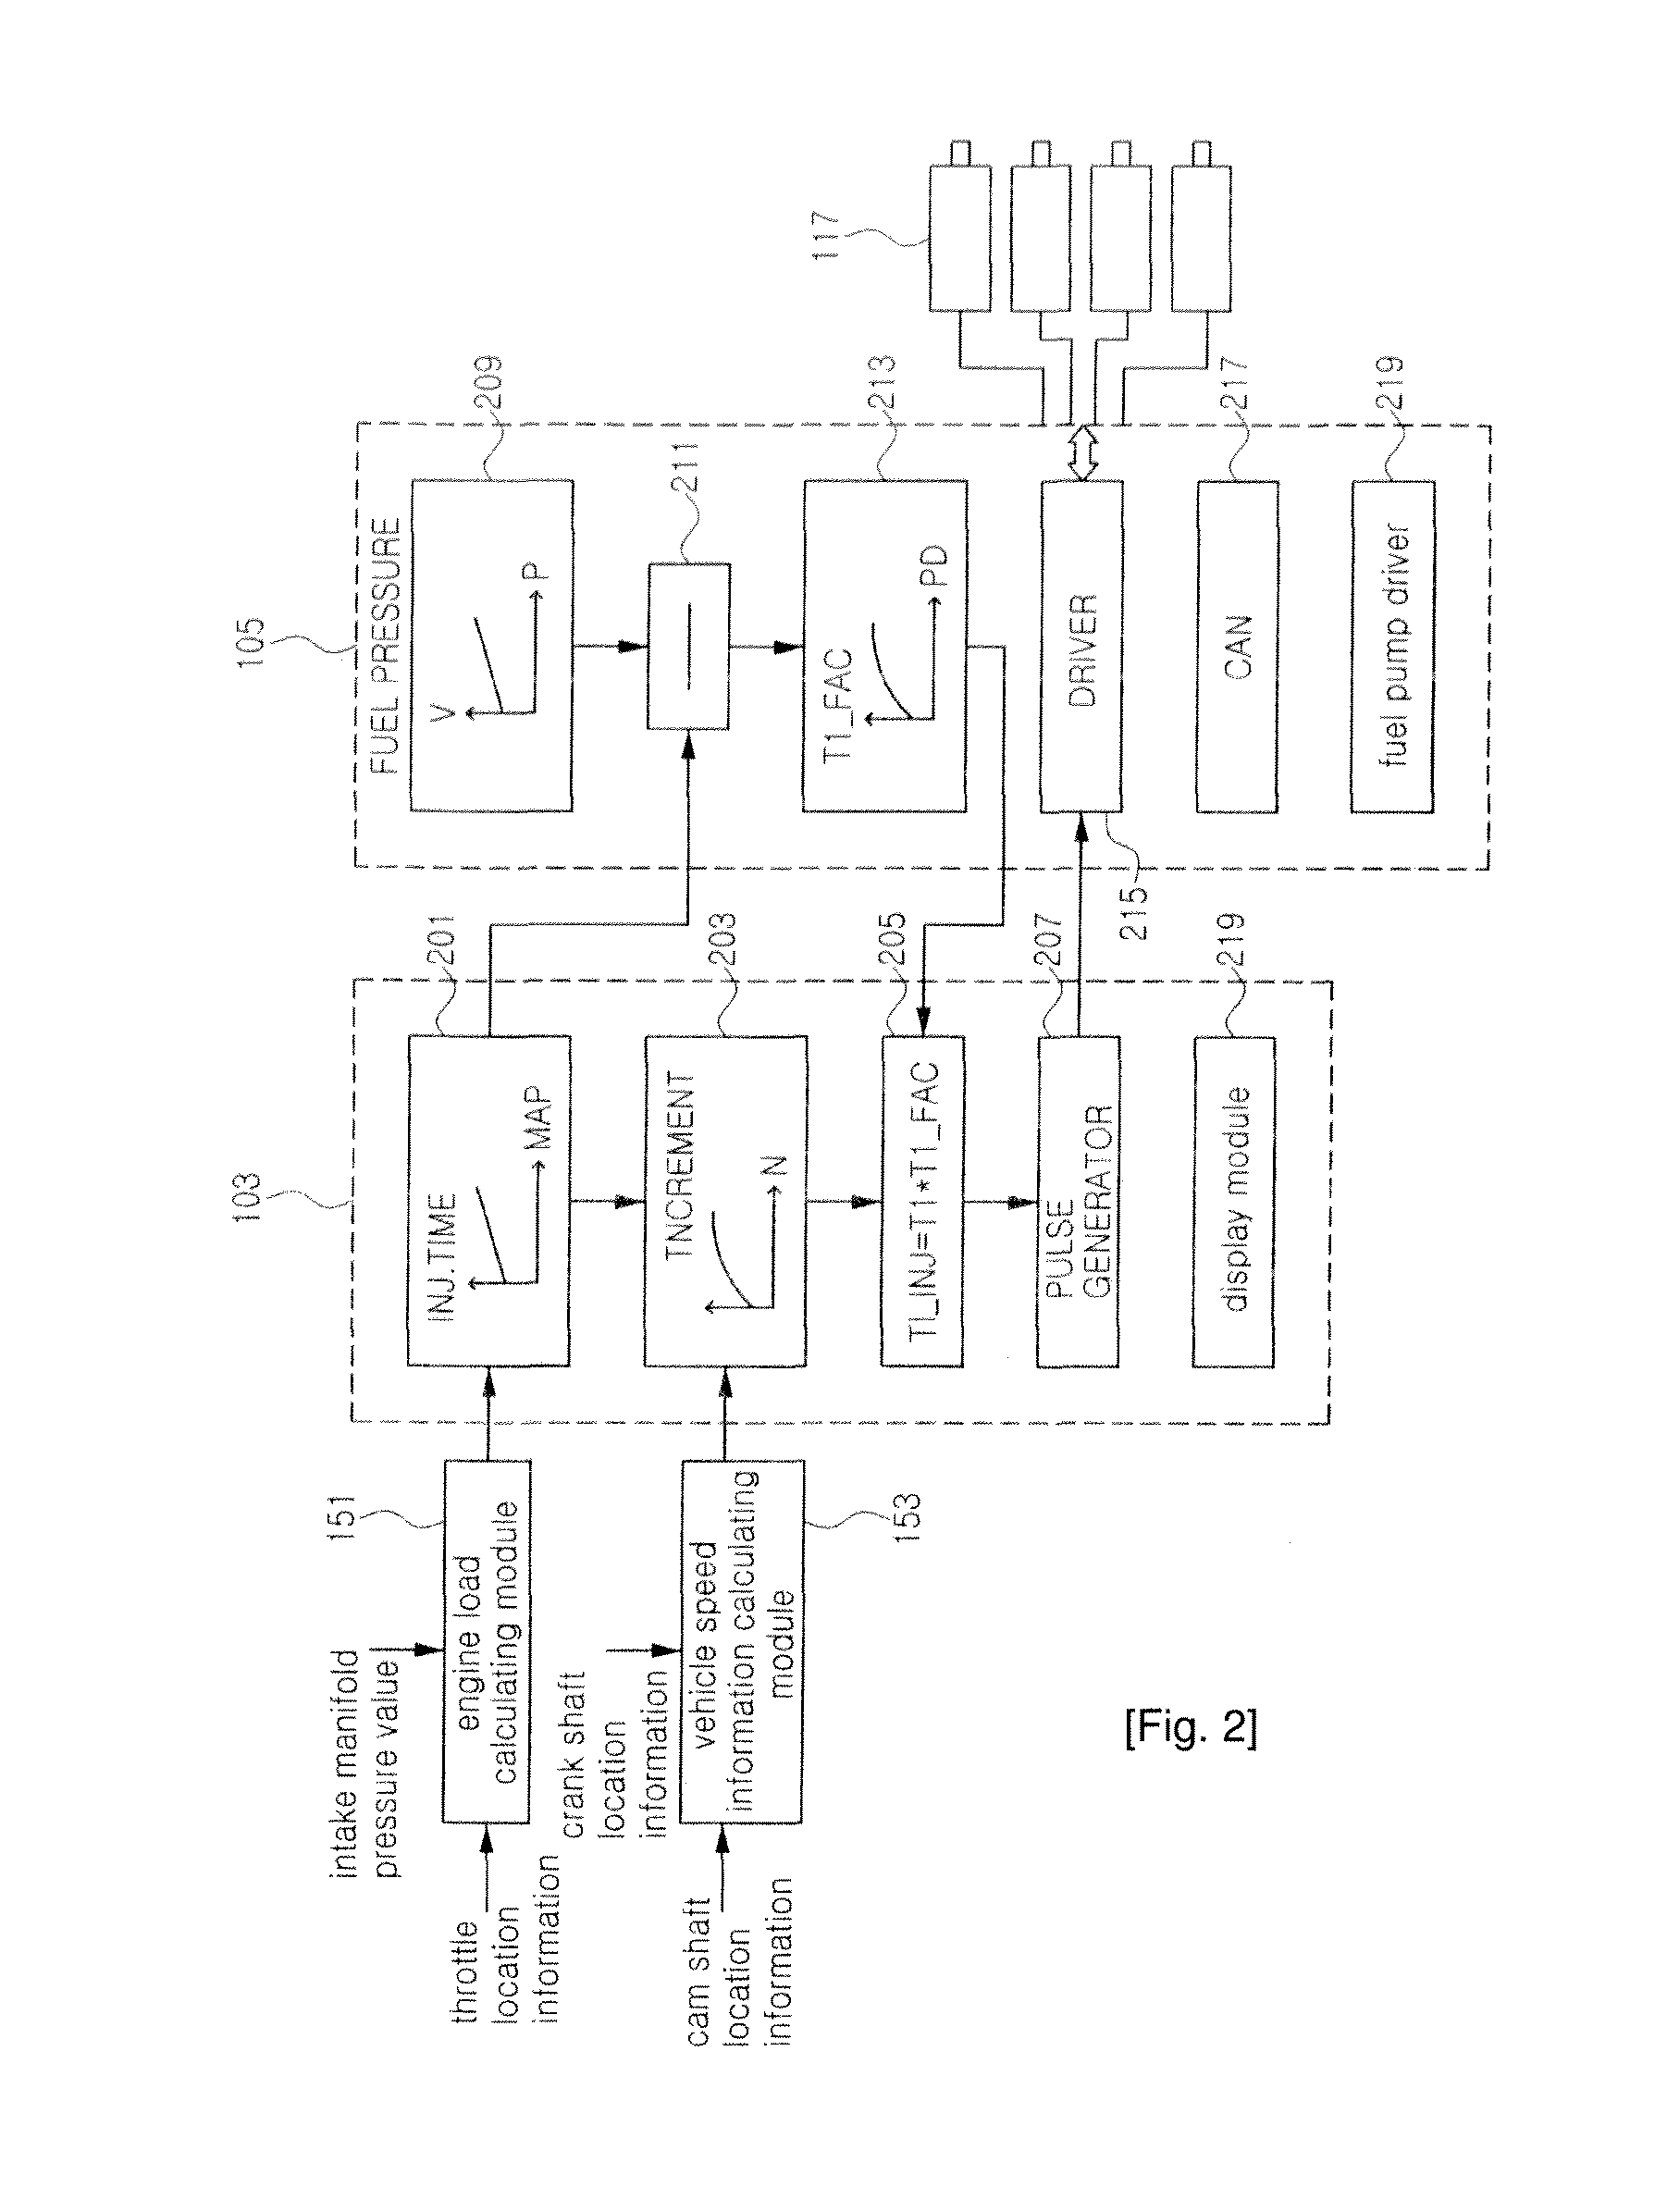 Method and apparatus for supplying fuel of LPG car having LPI system